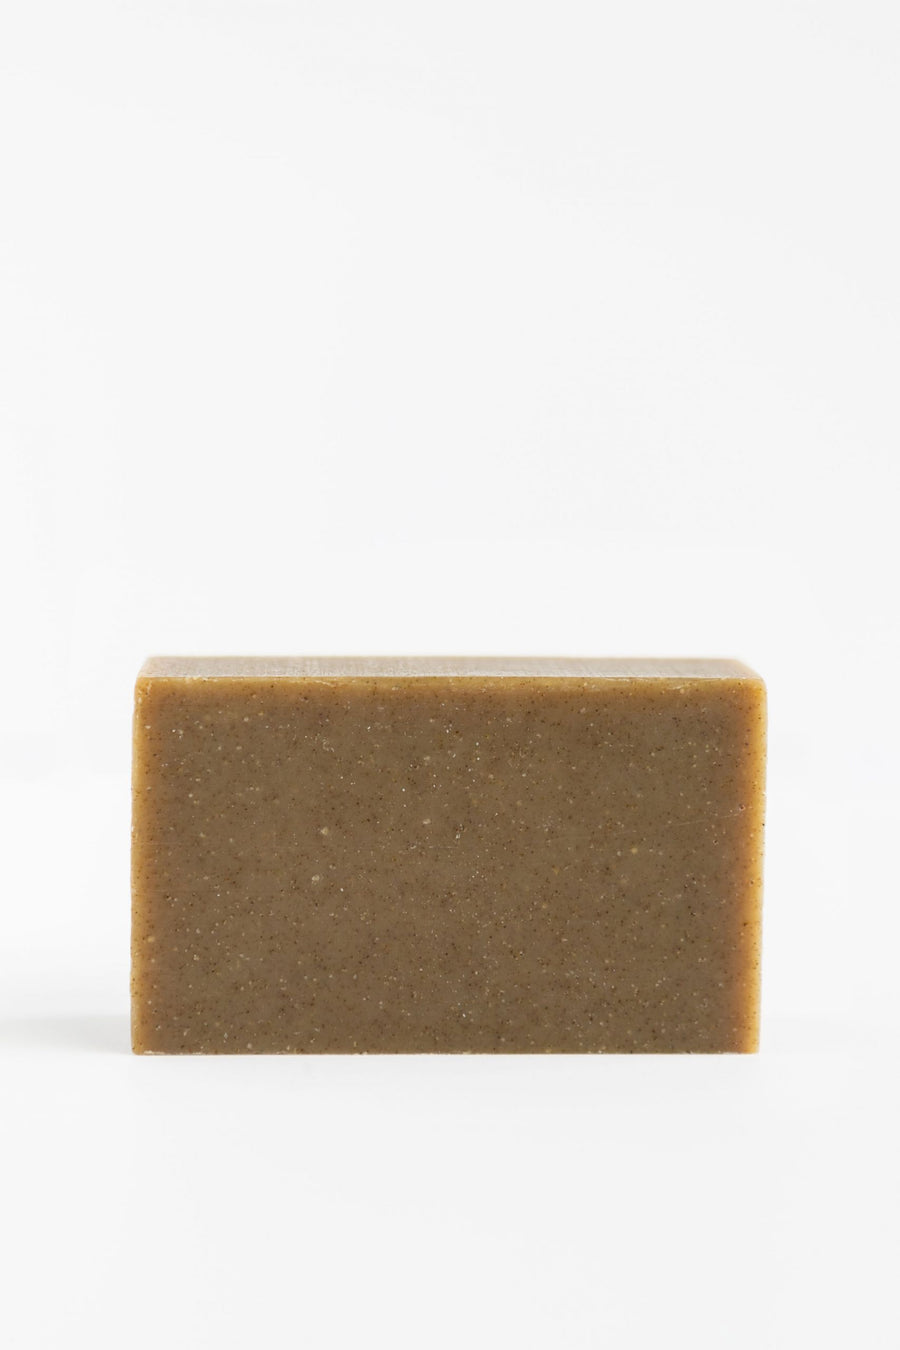 Anti-Aging Sage Face and Body Soap